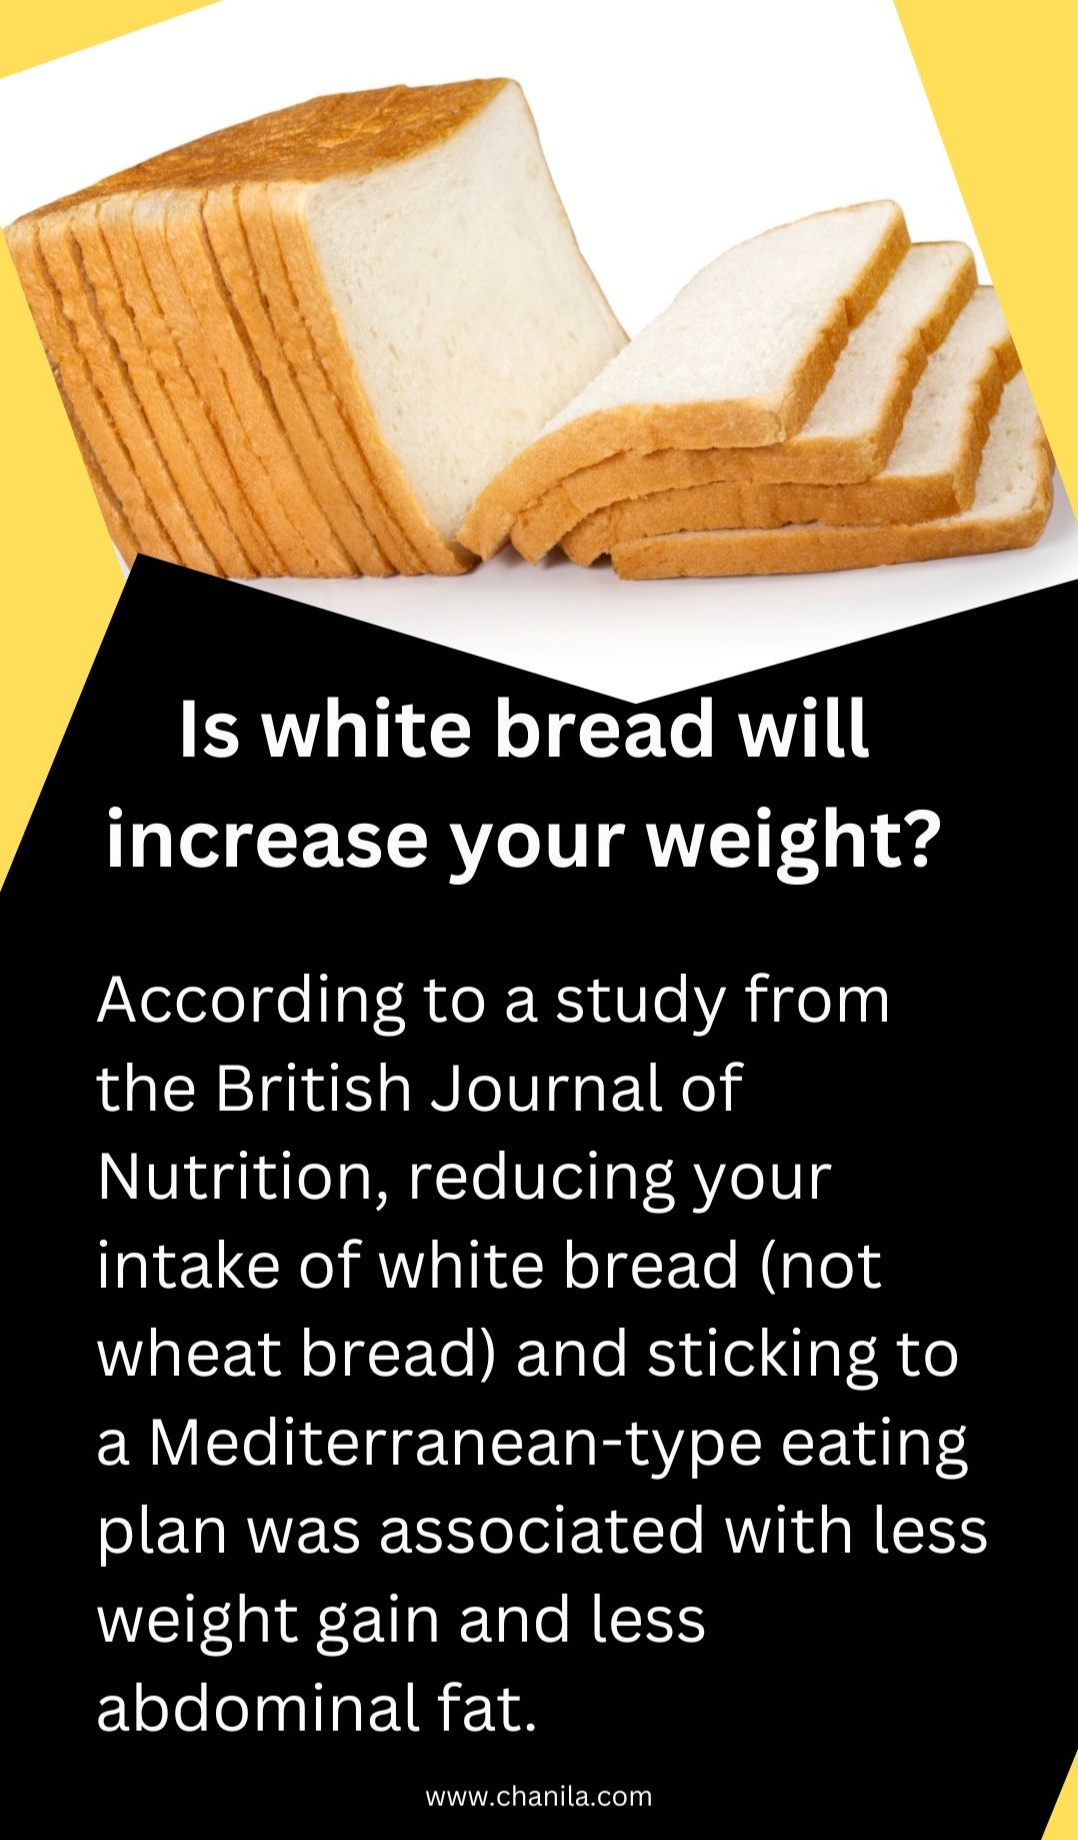 Is white bread will increase your weight?